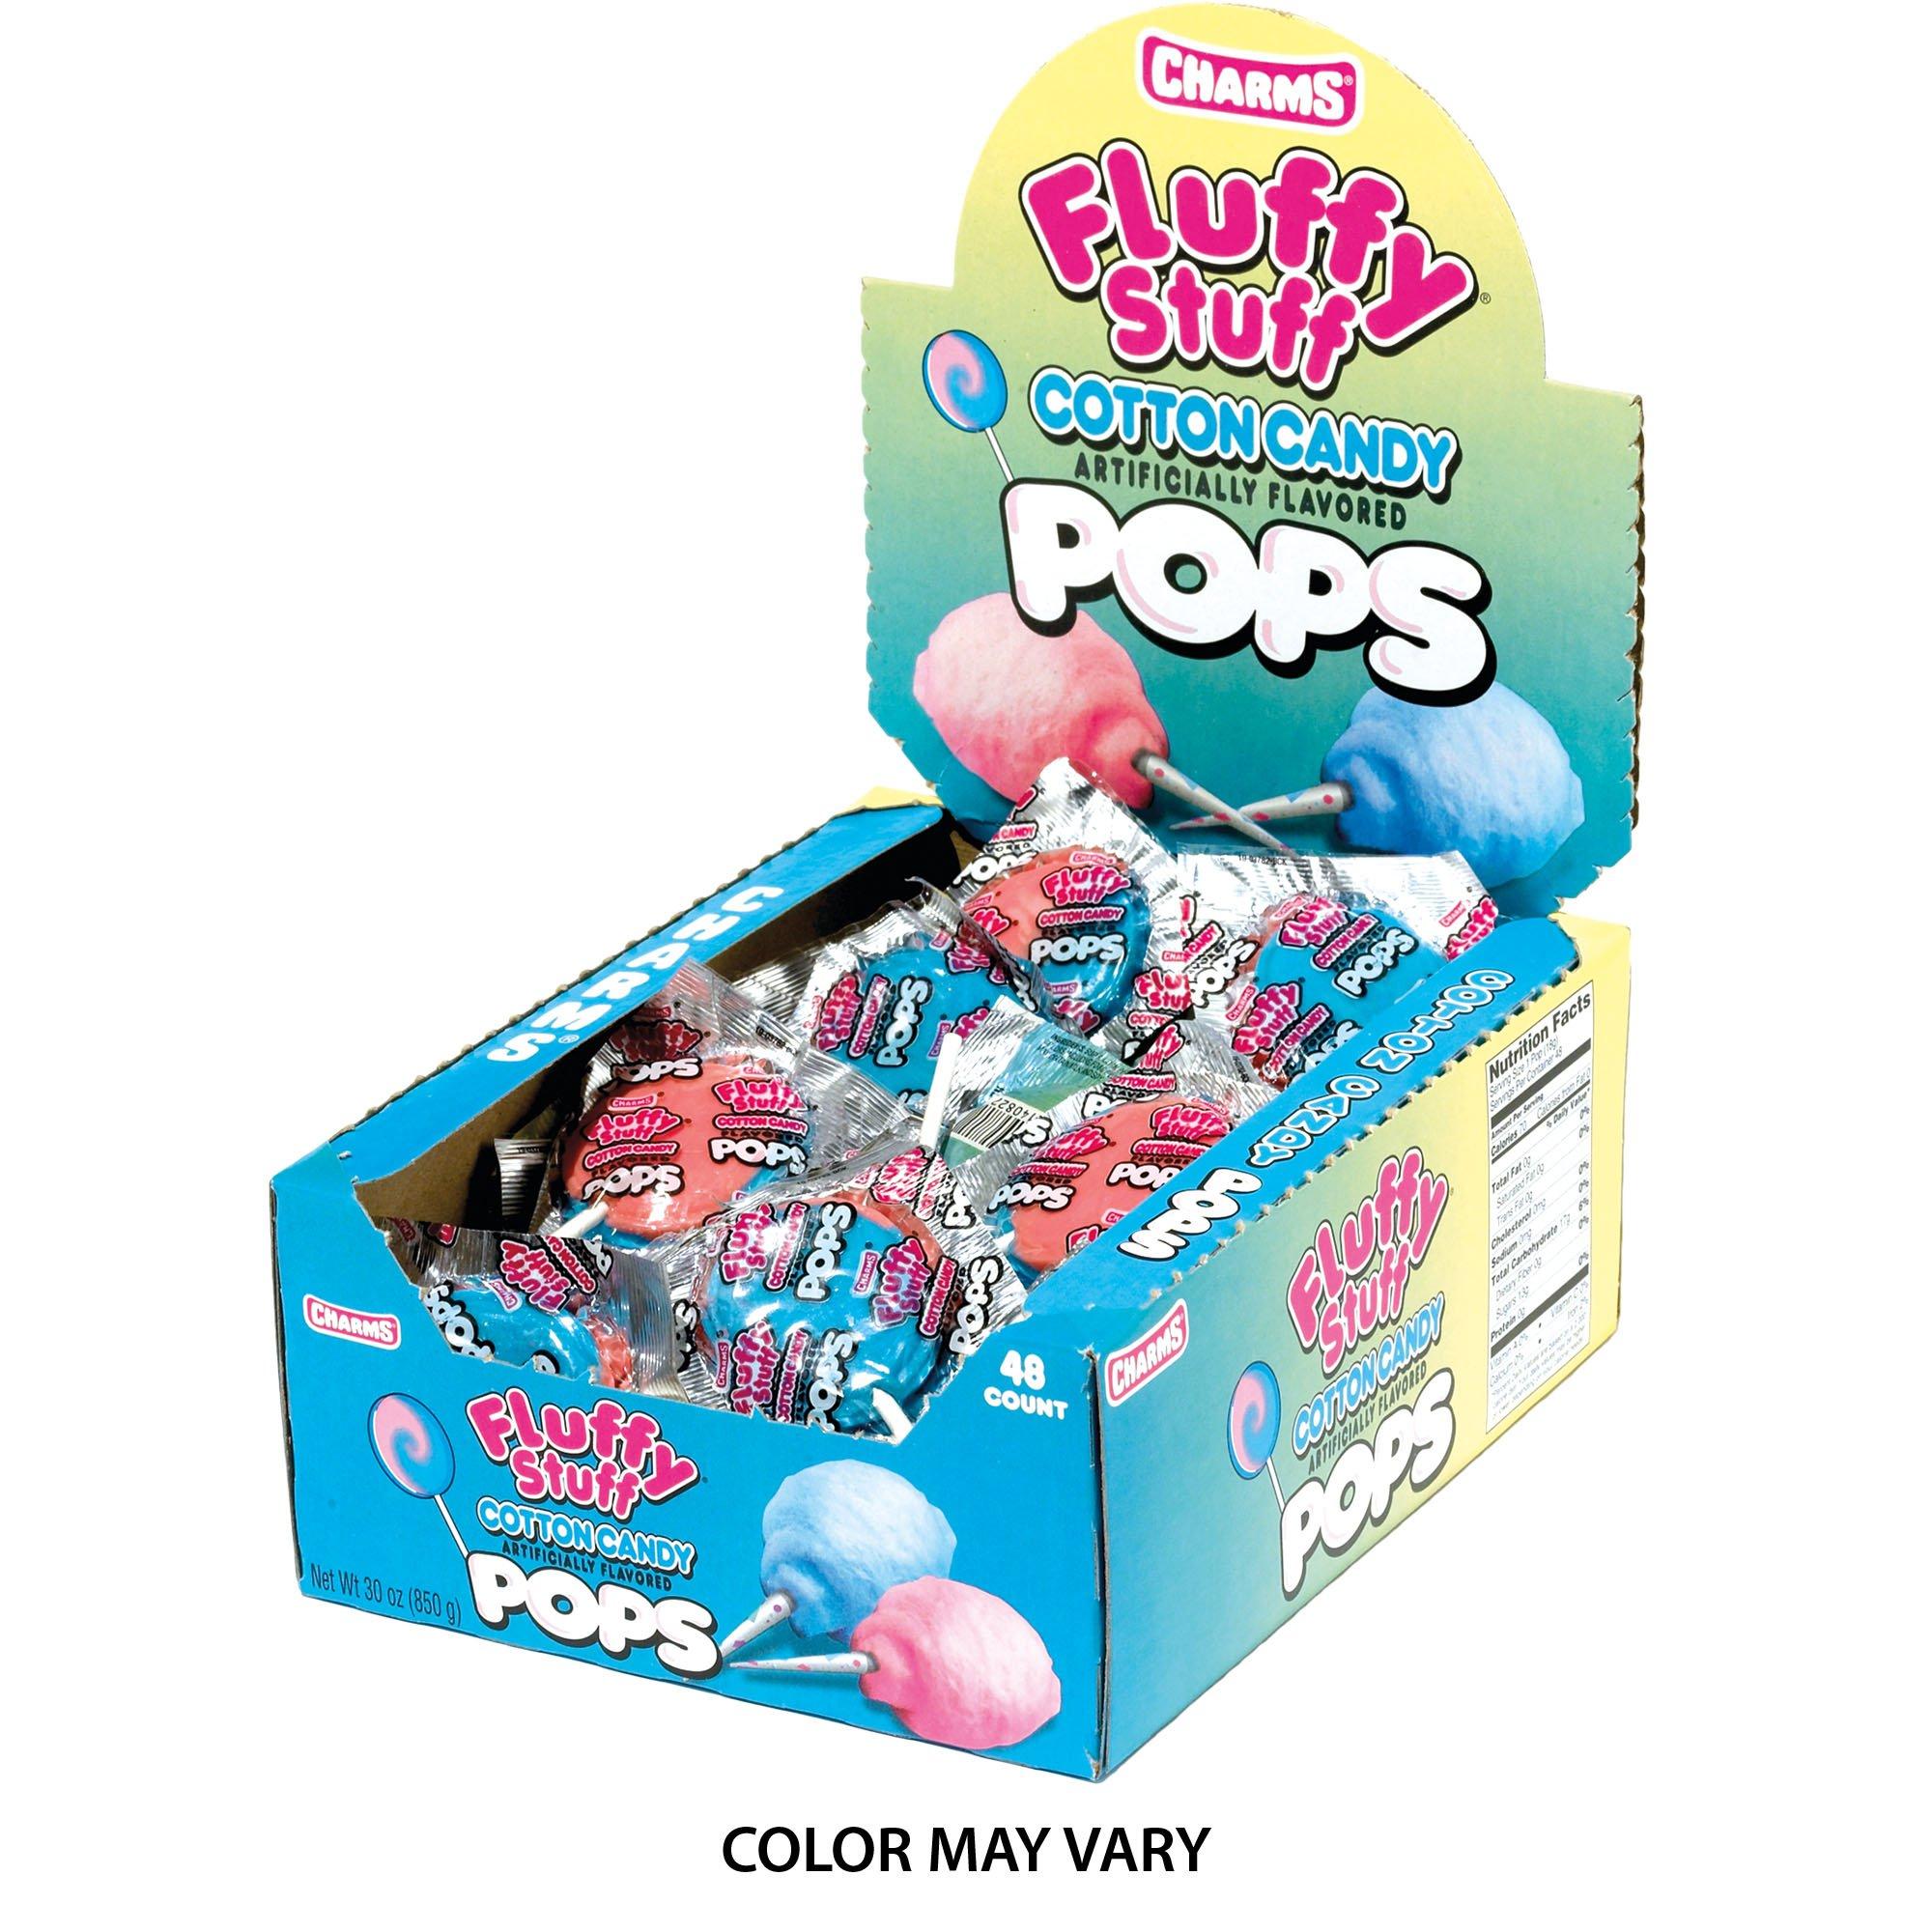 Fluffy Stuff Cotton Candy  Chocolate candy, candy specialty items